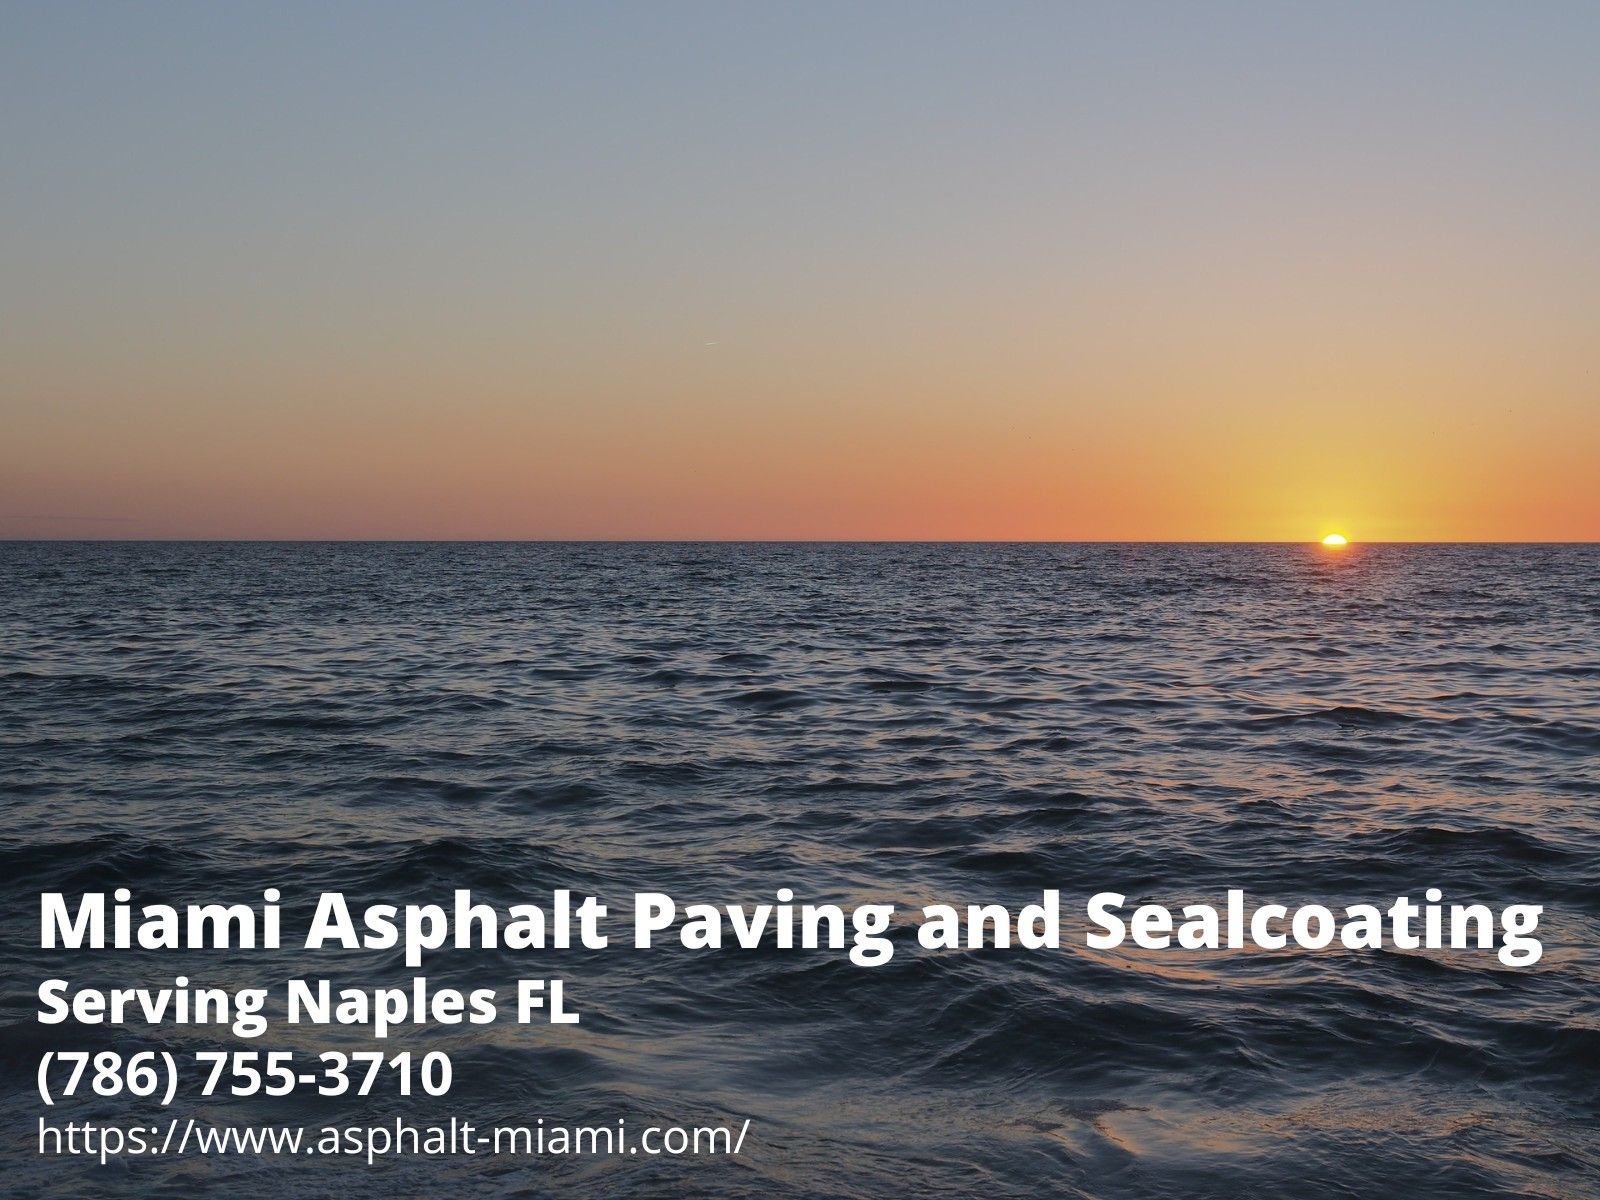 photo of a sunset in Naples FL with the contact details of Miami Asphalt Paving and Sealcoating